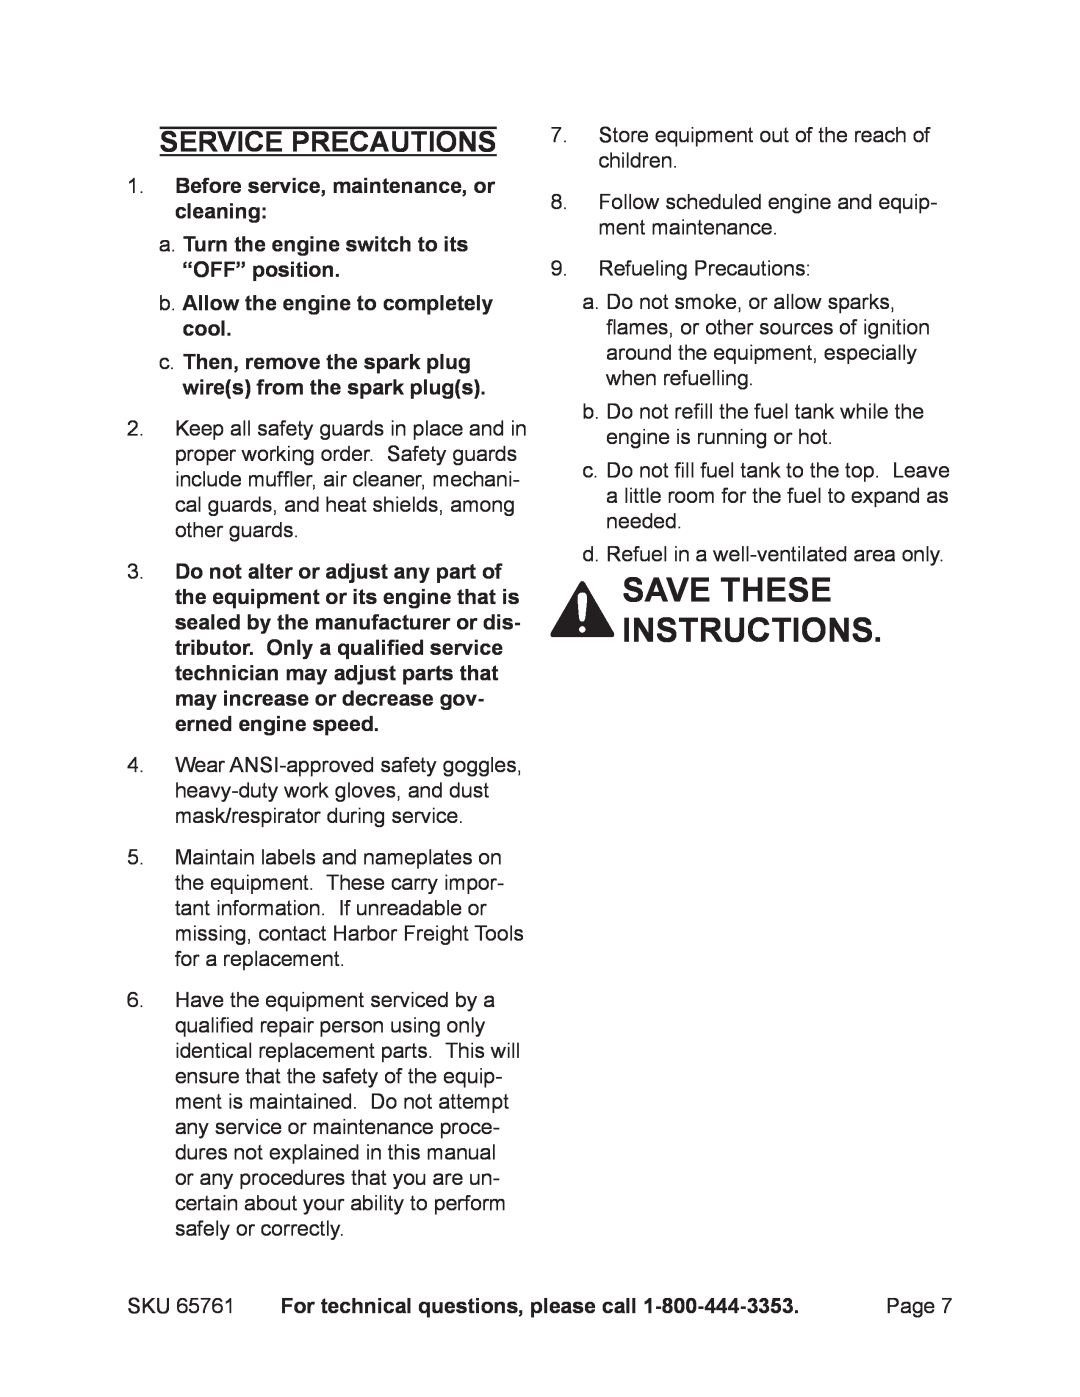 Harbor Freight Tools 65761 manual Save these instructions, Service precautions, Before service, maintenance, or cleaning 